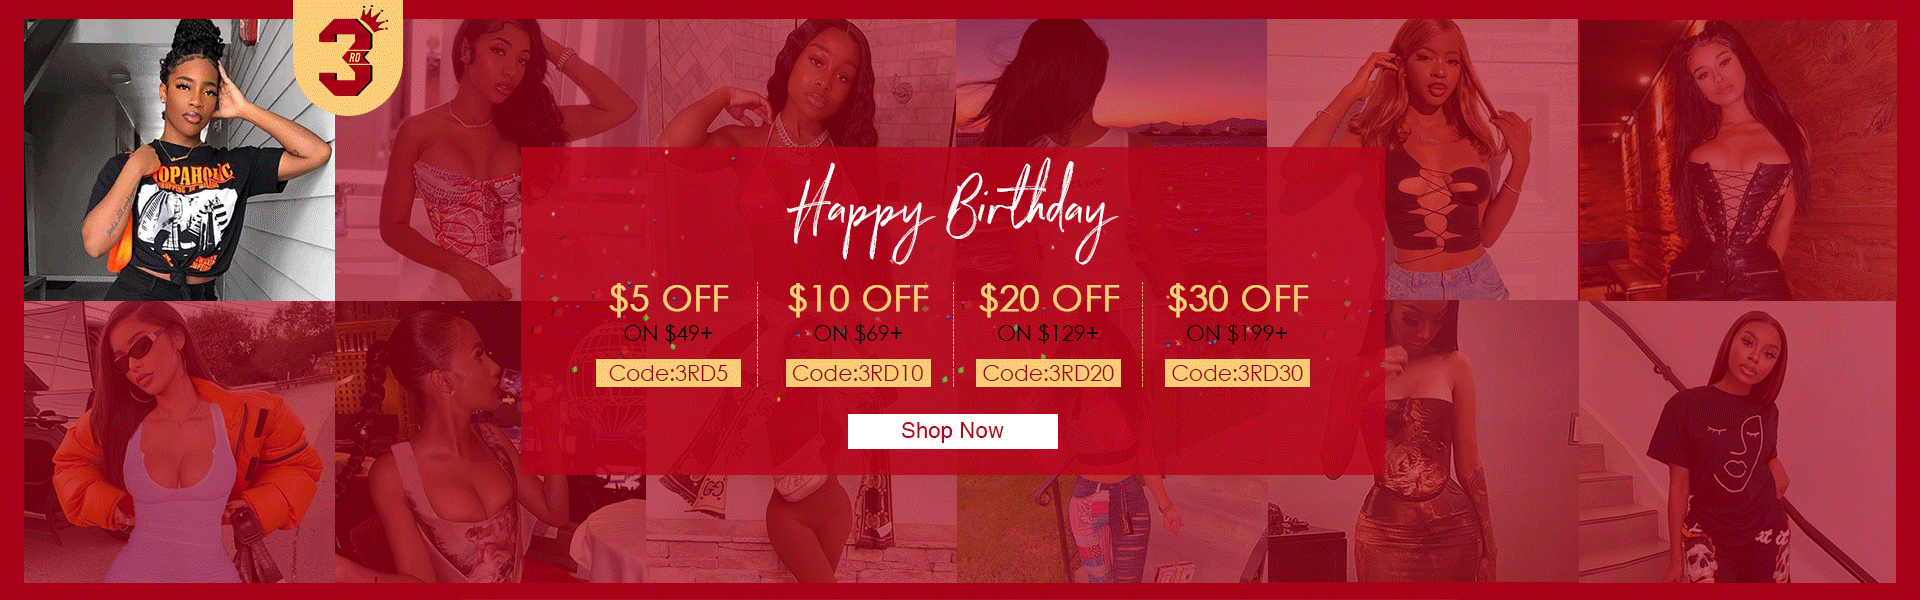 Get $5 To $30 Off With This Discount Coupon At Jurllyshe.Com